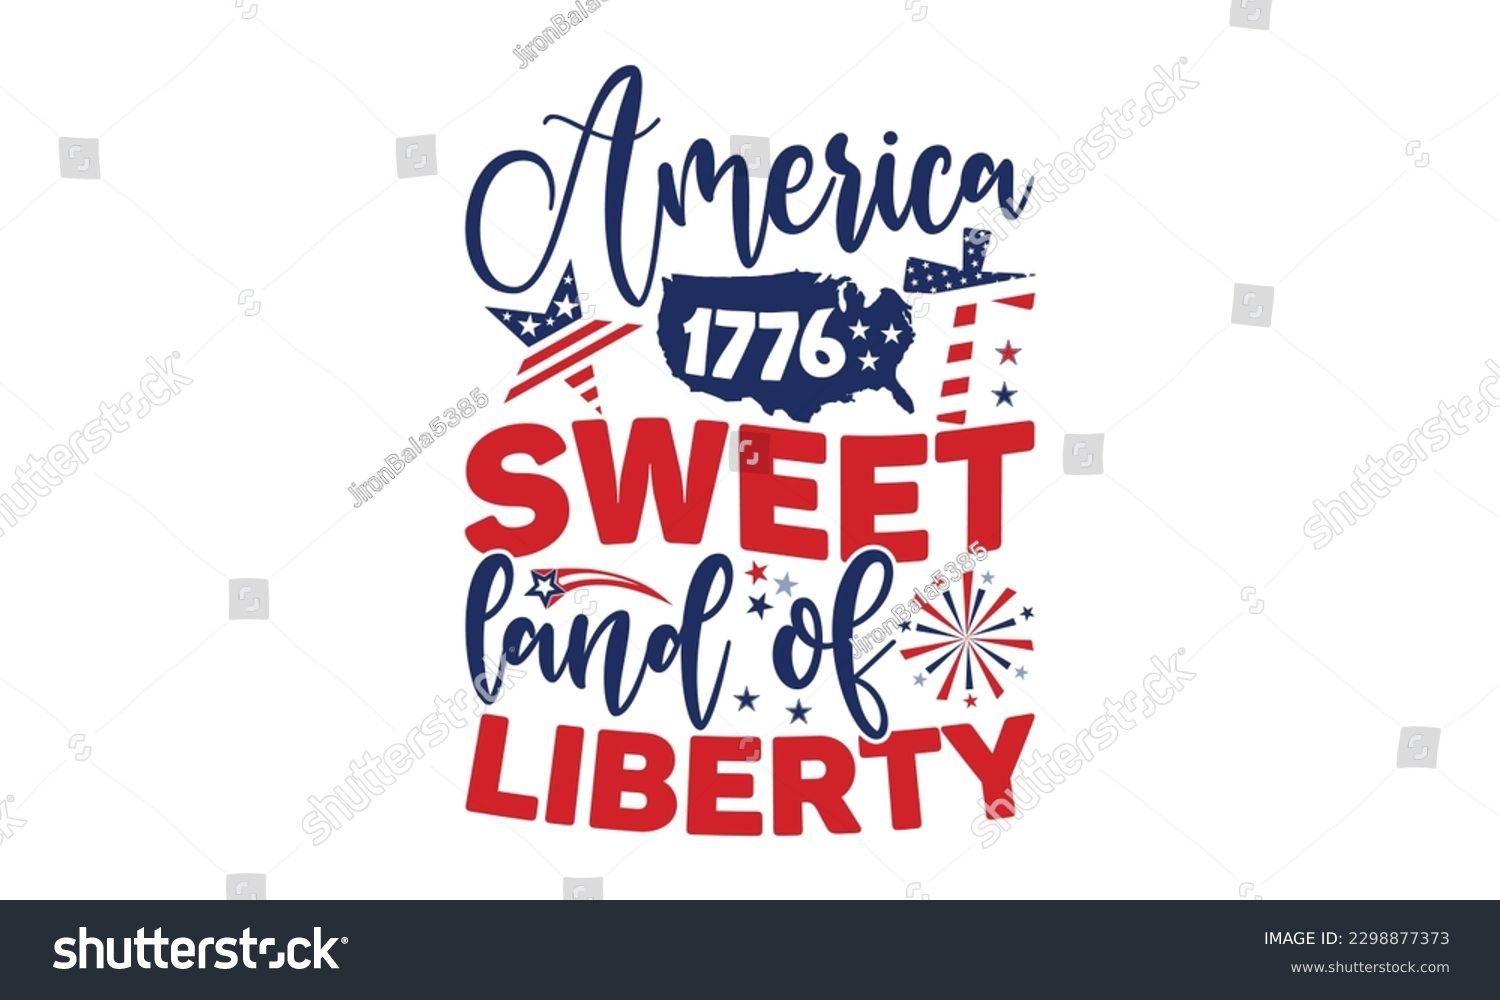 SVG of America 1776 Sweet Land Of  Liberty - 4th of July SVG Design, Hand written vector design, Illustration for prints on T-Shirts, bags and Posters, for Cutting Machine, Cameo, Cricut. svg